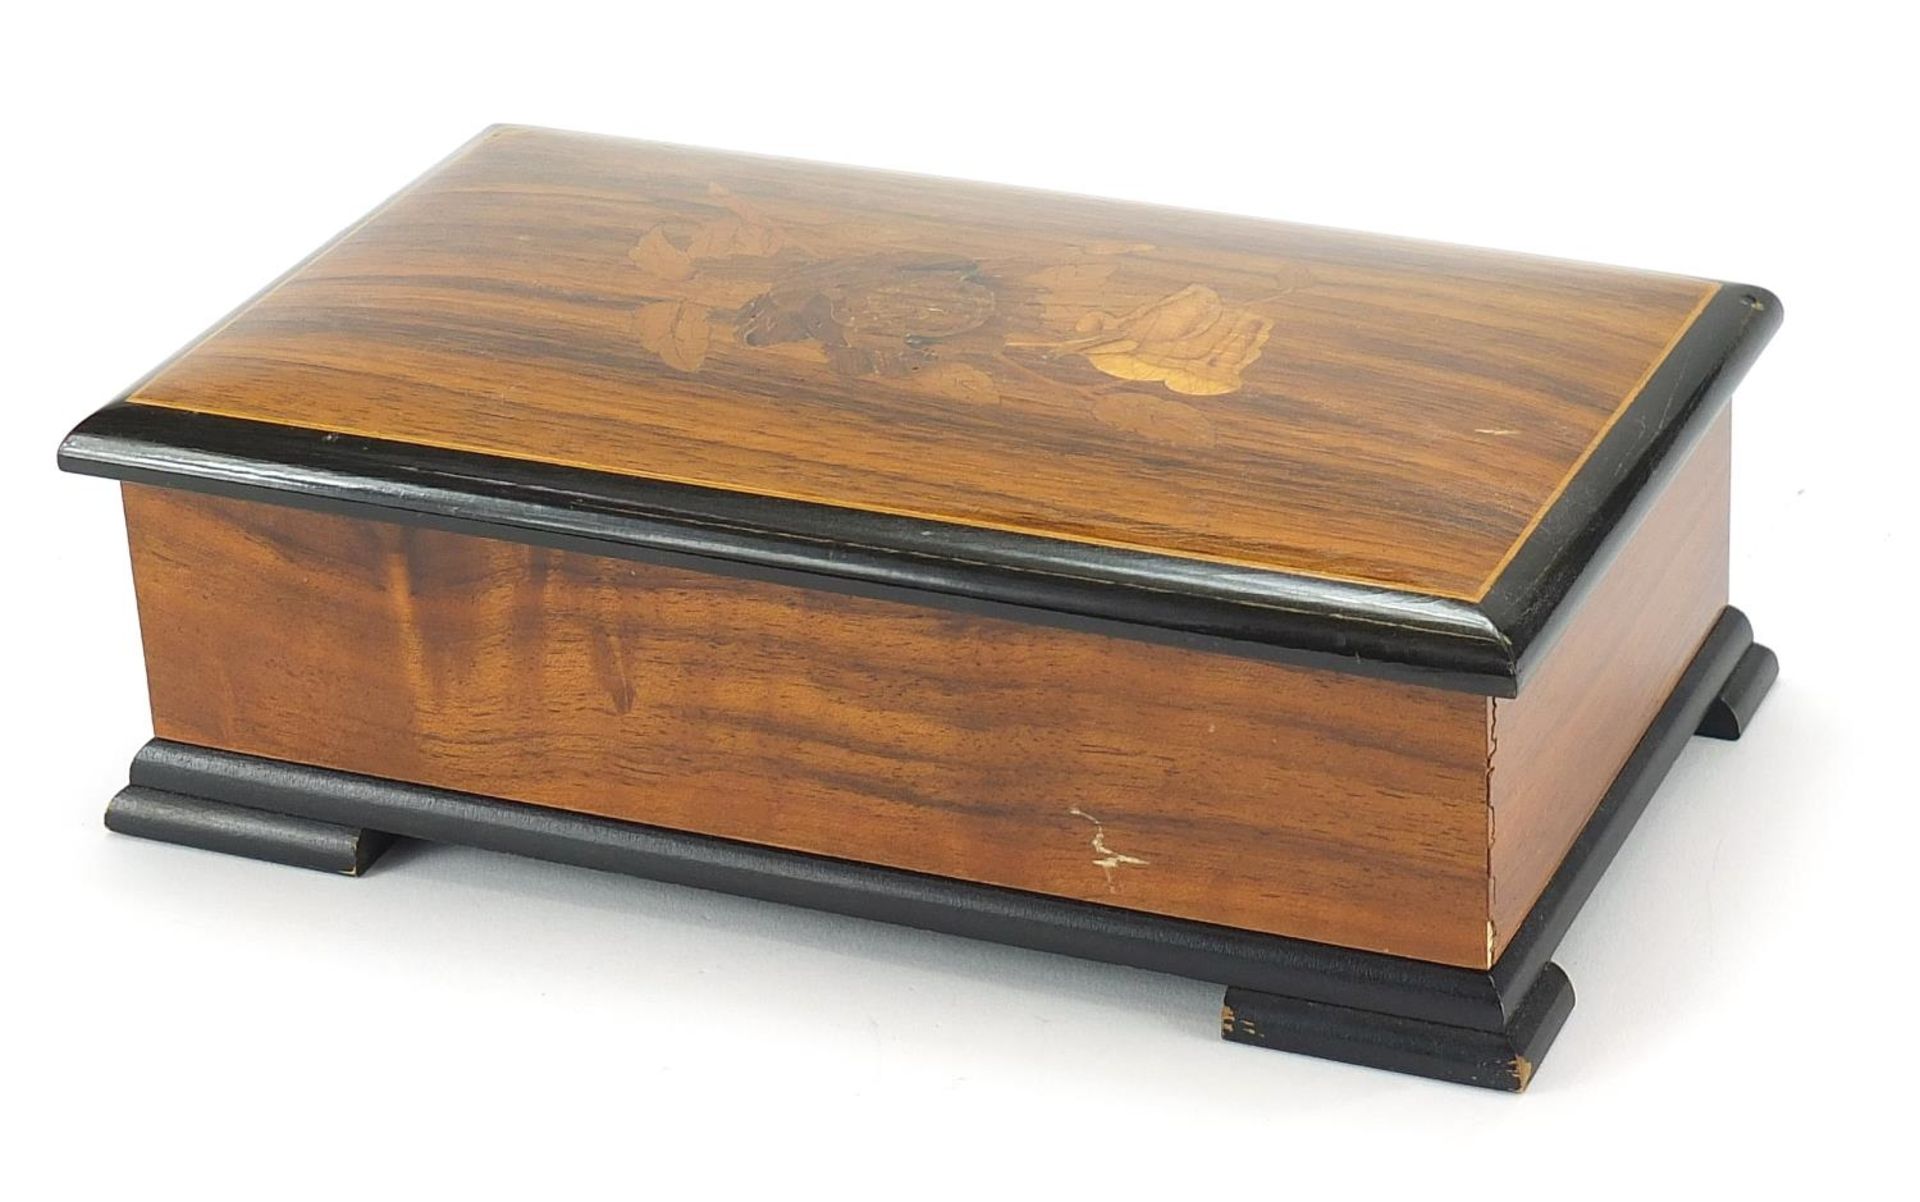 Thorens Swiss music box housed in an inlaid wooden case, 8cm H x 22.5cm W x 13cm D - Image 5 of 5